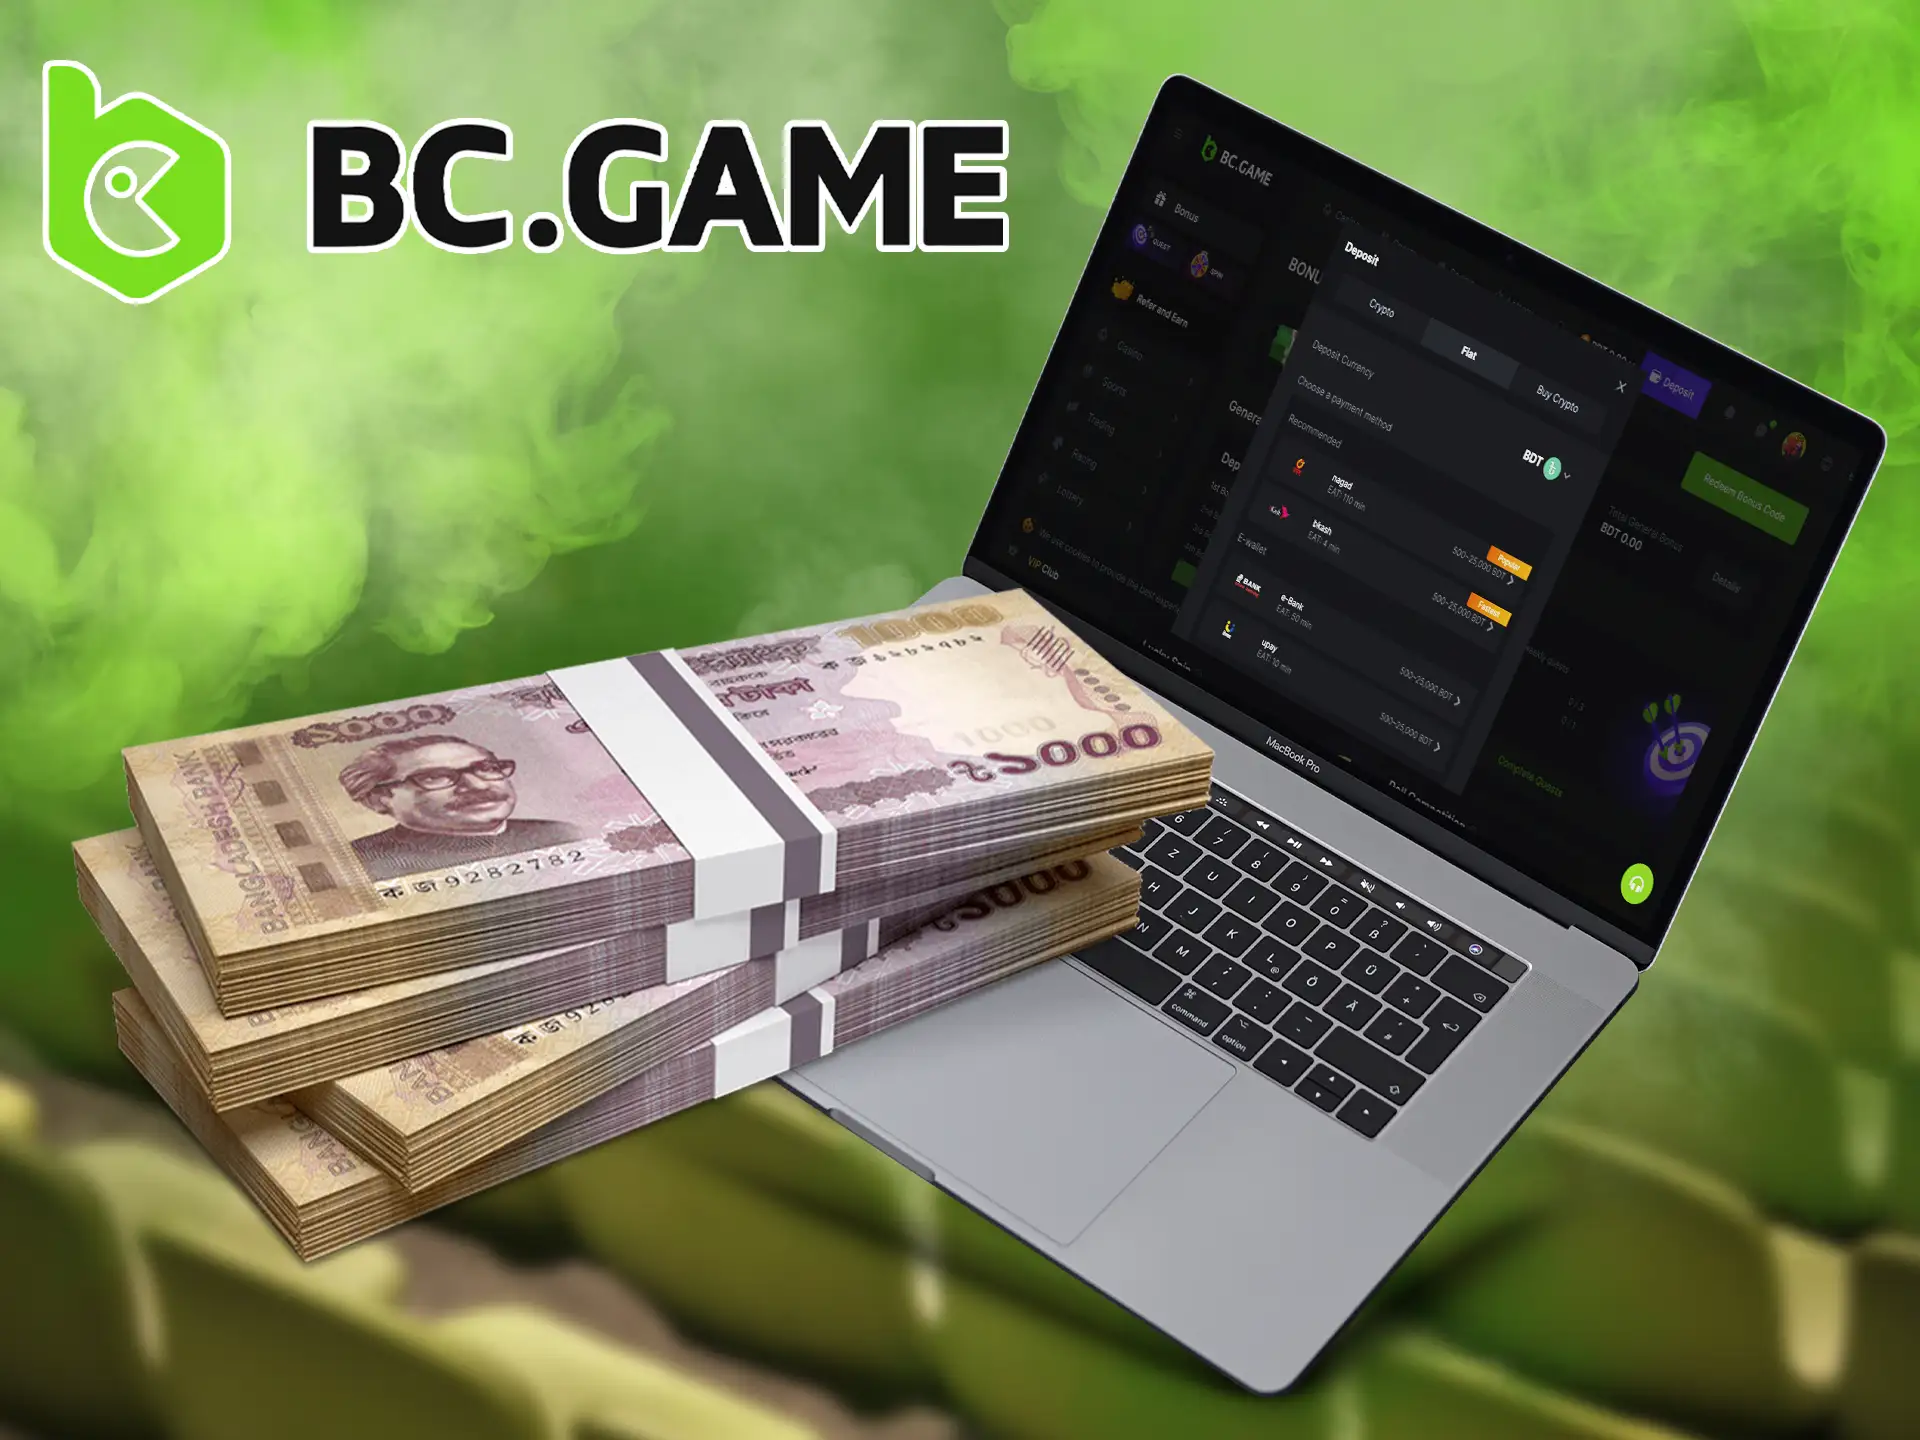 Our simple guide will help players from Bangladesh to fund money and start playing at BC GAME.